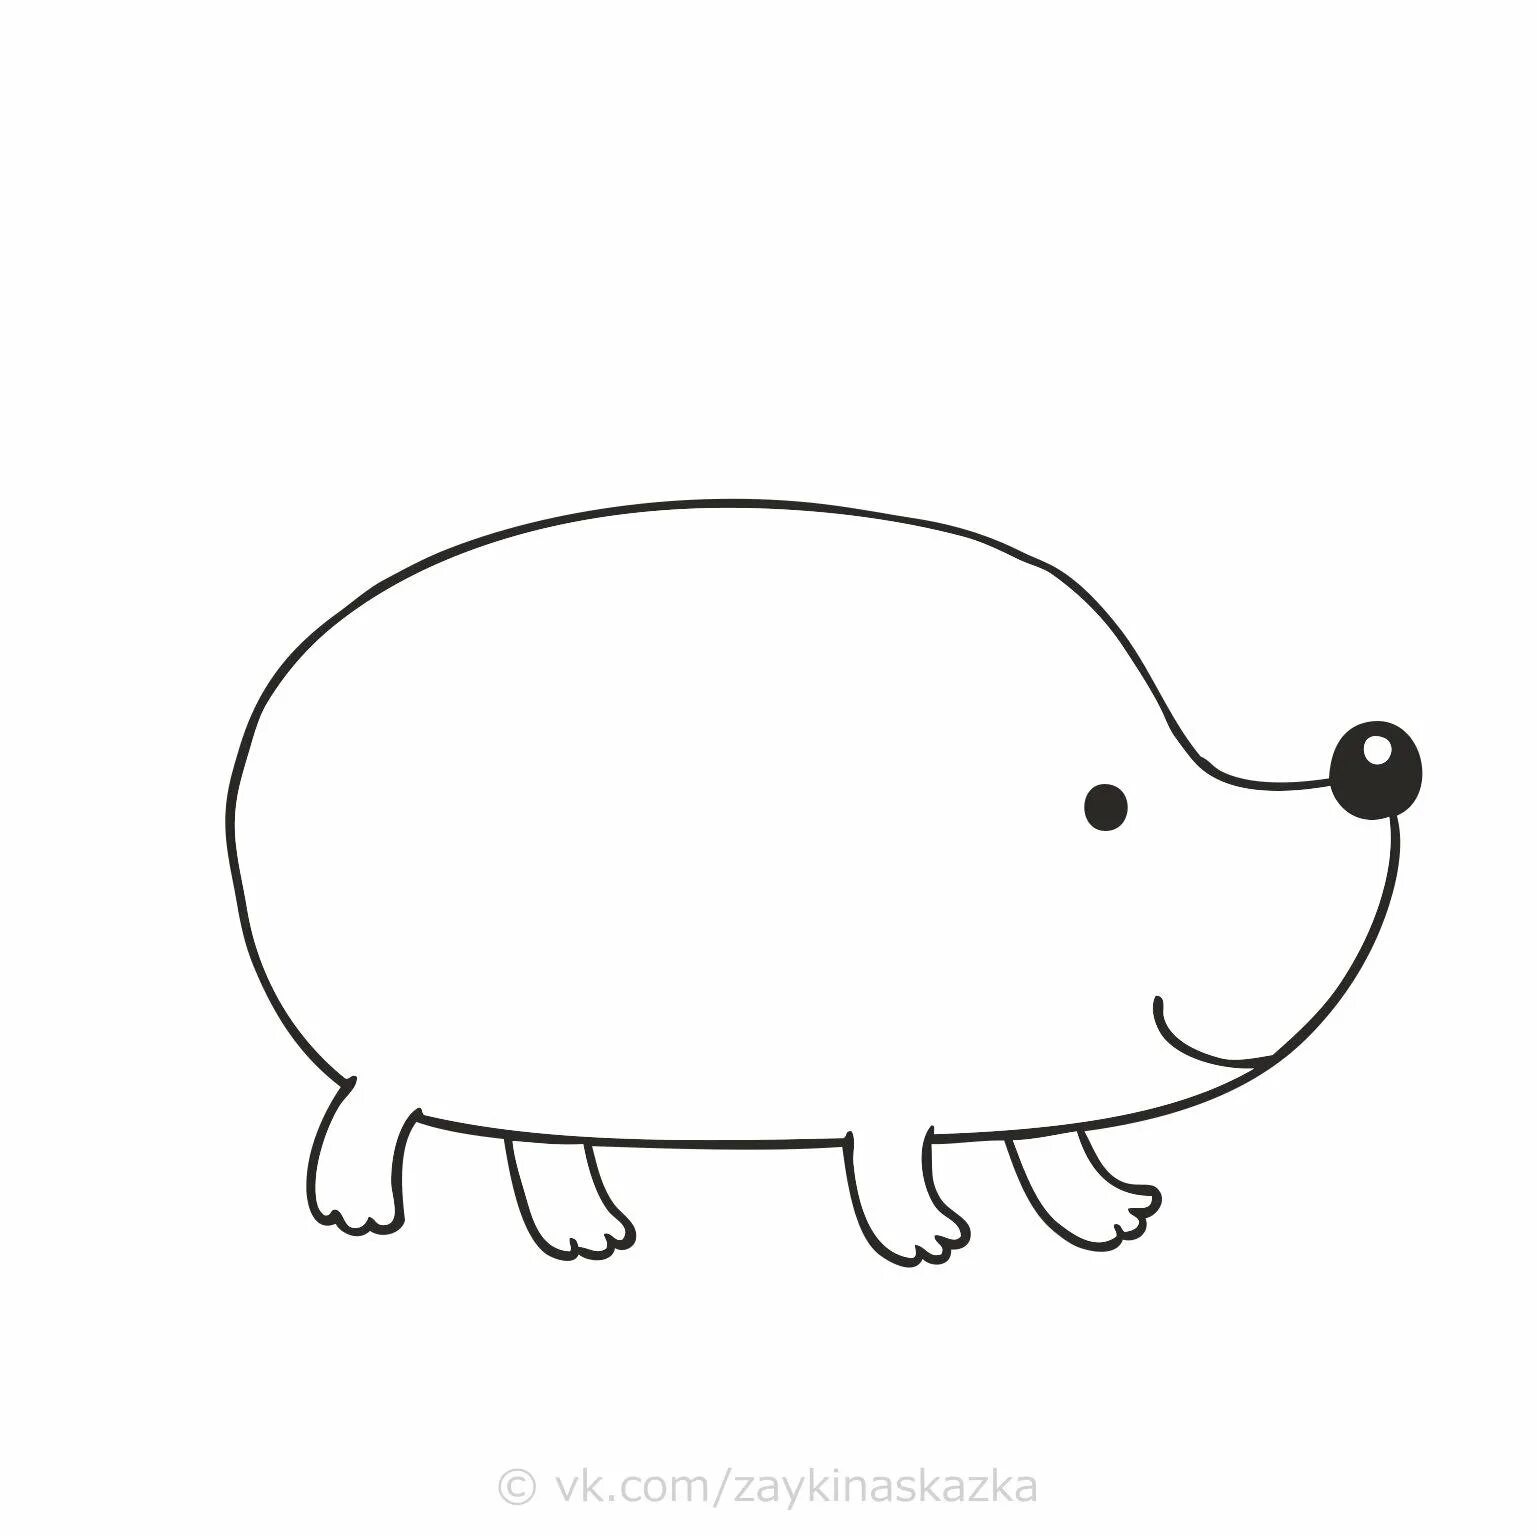 Hedgehog without spines #5